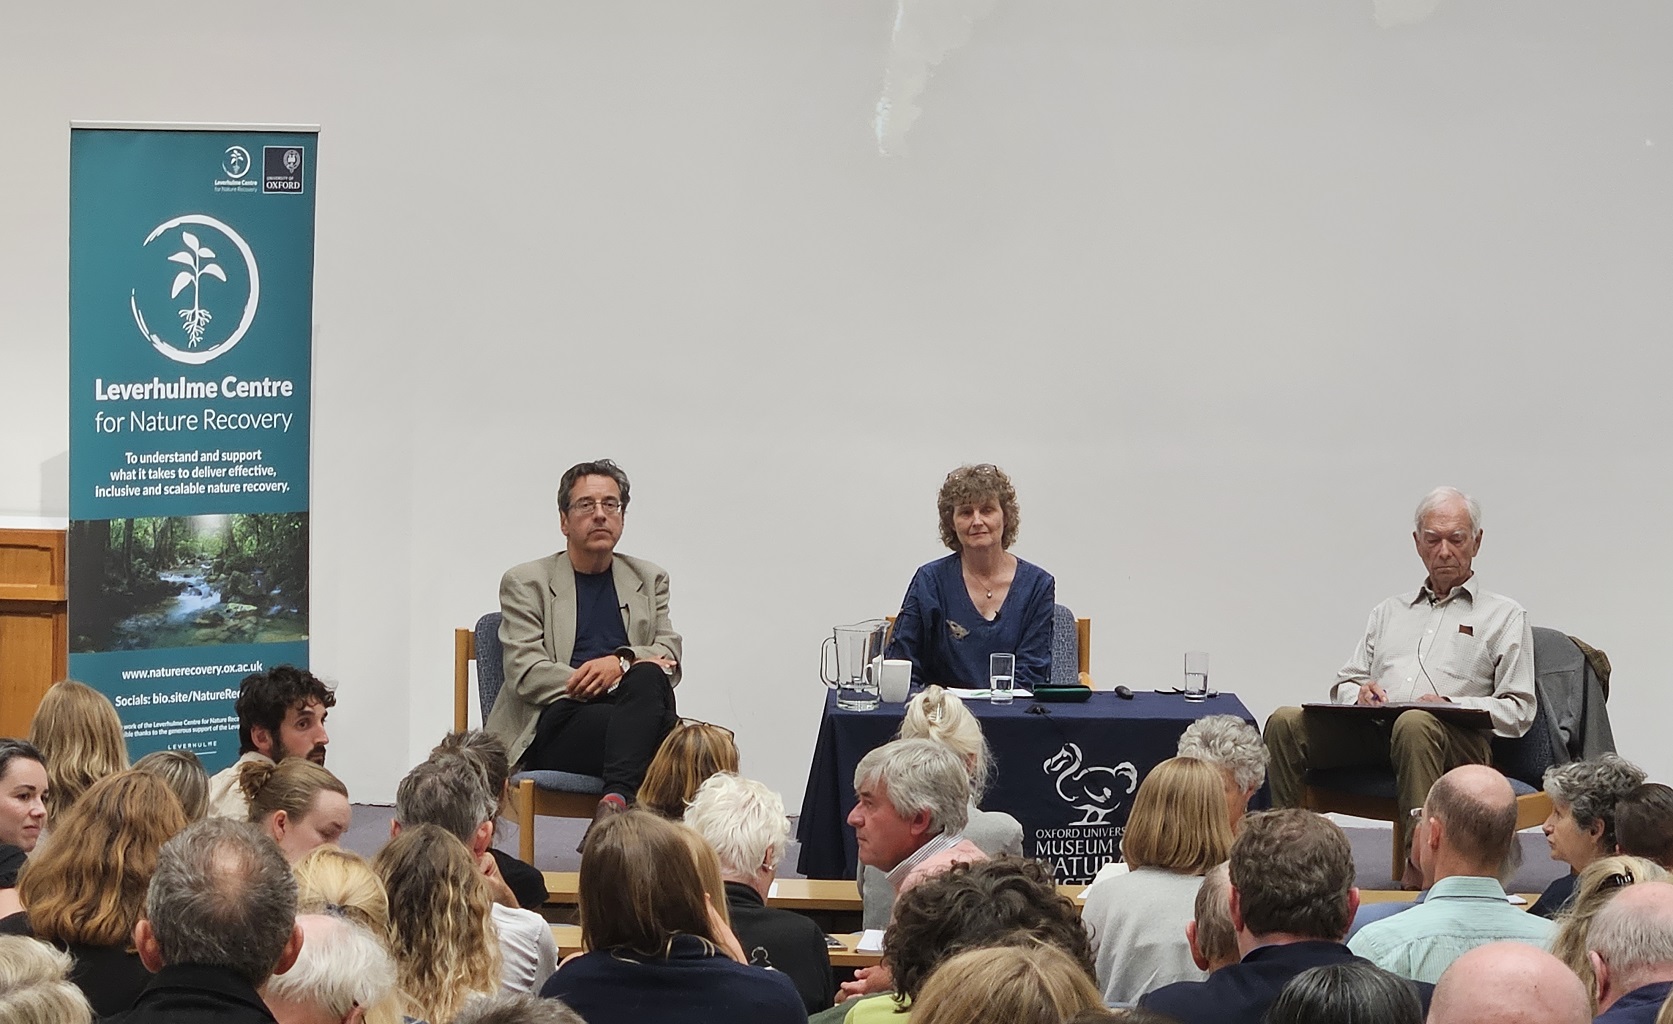 A banner for the Leverhulme Centre for Nature Recovery sits on the stage inhabited by George Monbiot, EJ. Milner-Gulland, and Allan Savory.